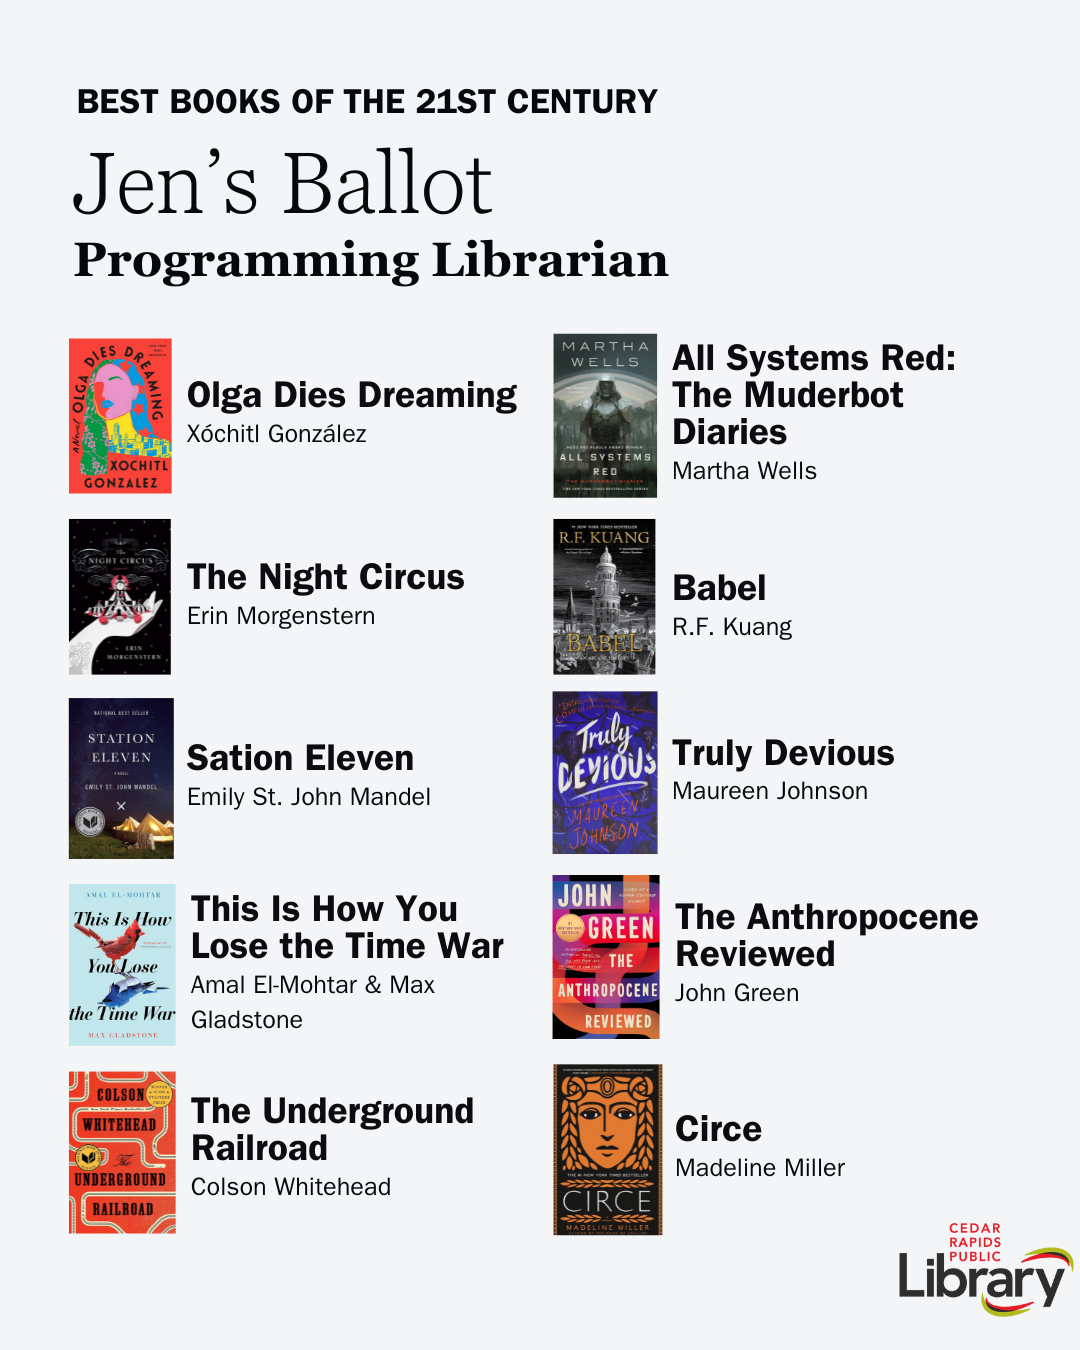 A graphic shows Programming Librarian Jen's Ballot for Best Books of the 21st Century